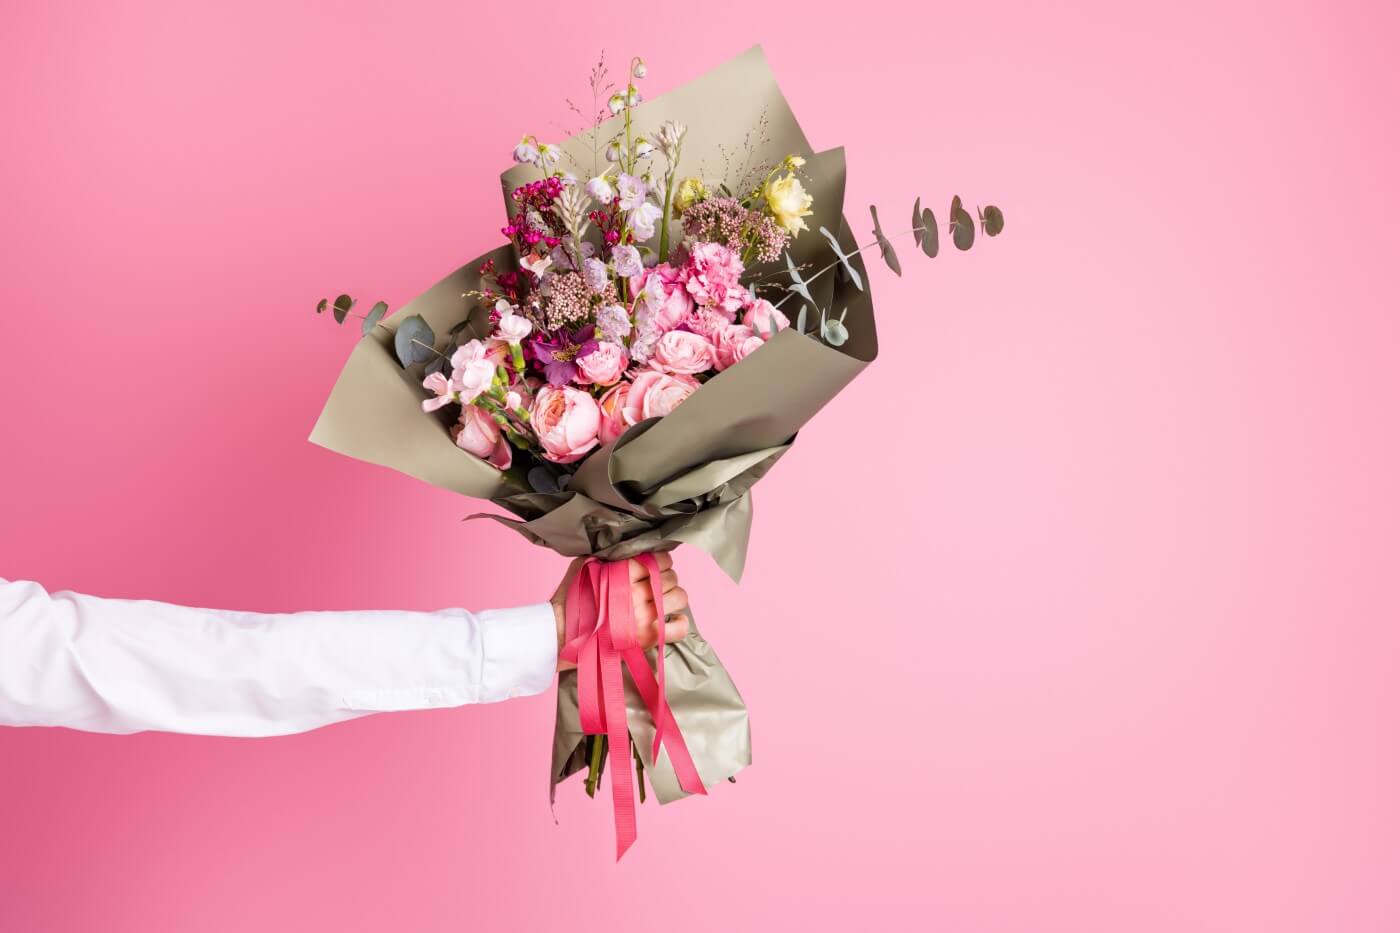 15 Best Types of Flowers for Birthday Gifts